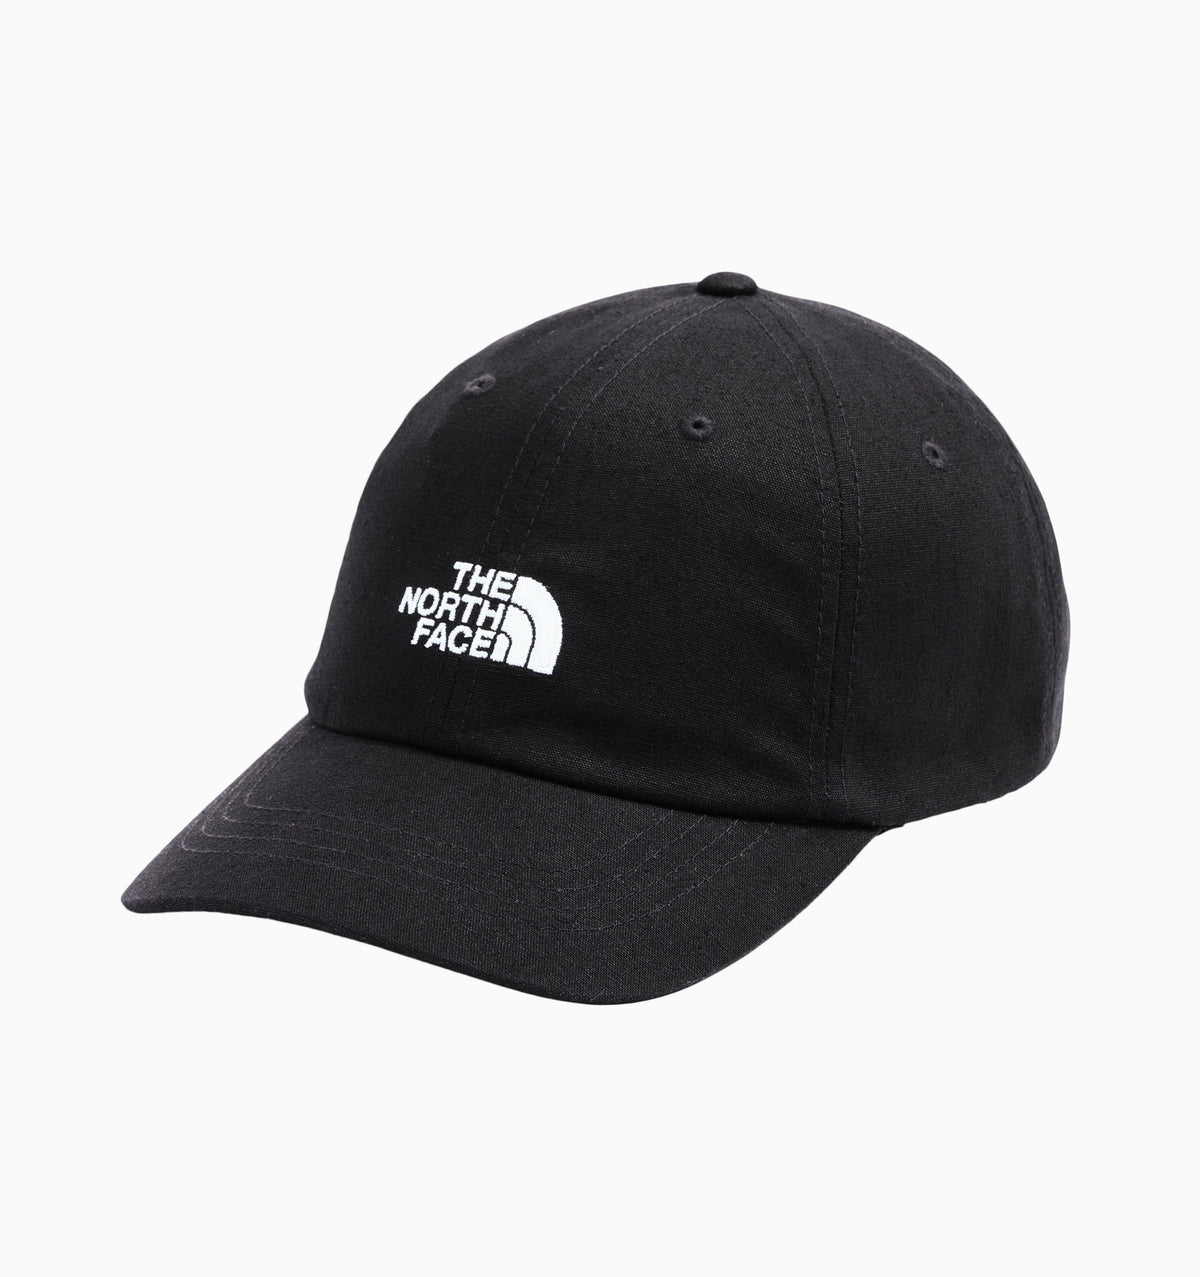 The North Face Norm Hat (One Size) - Black